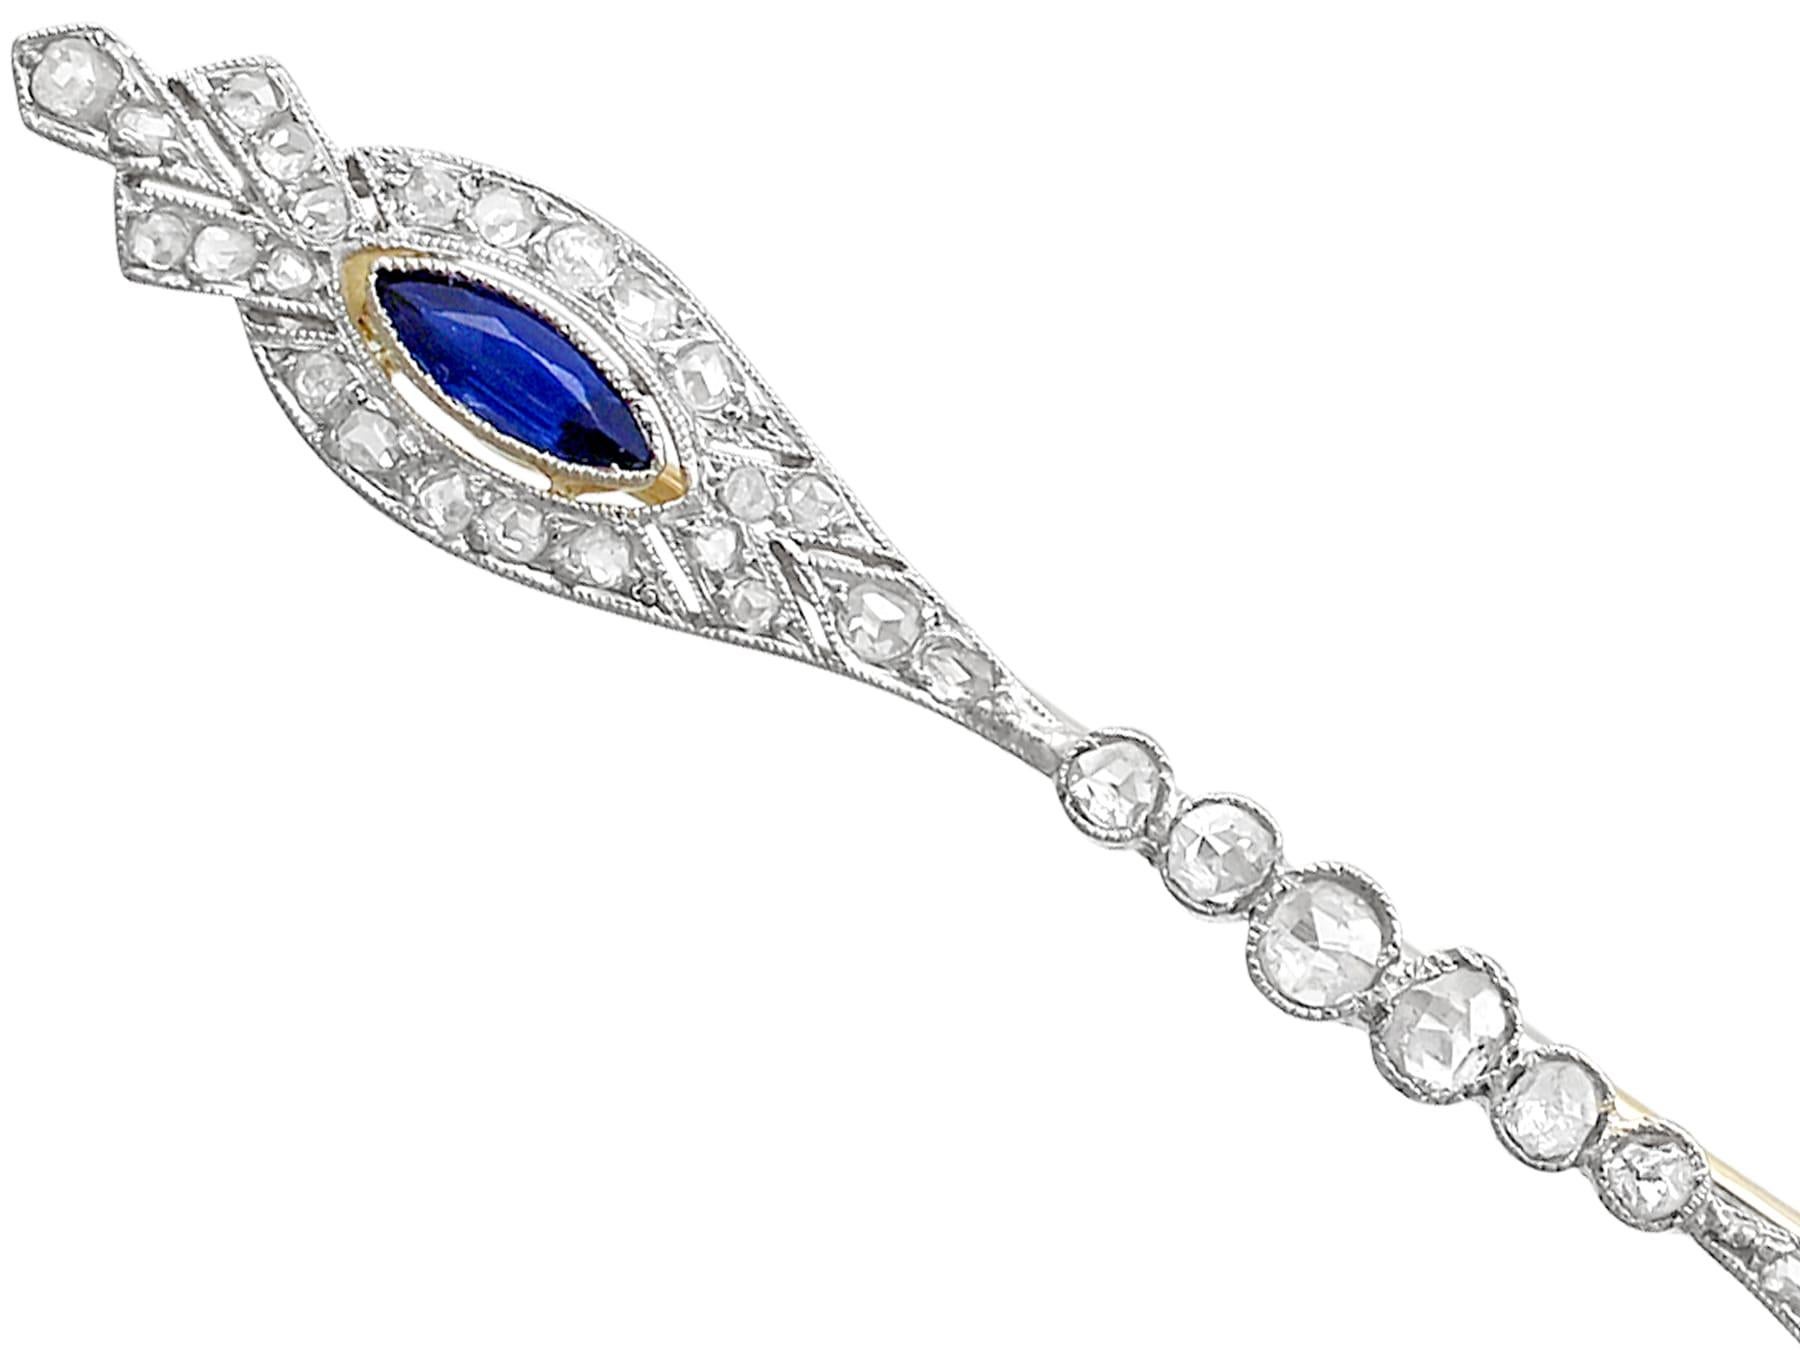 An impressive antique 0.58 carat sapphire and 1.19 carat diamond, 18 karat yellow and white gold bar brooch; part of our diverse antique jewelry and estate jewelry collections.

This fine and impressive antique sapphire and diamond brooch has been